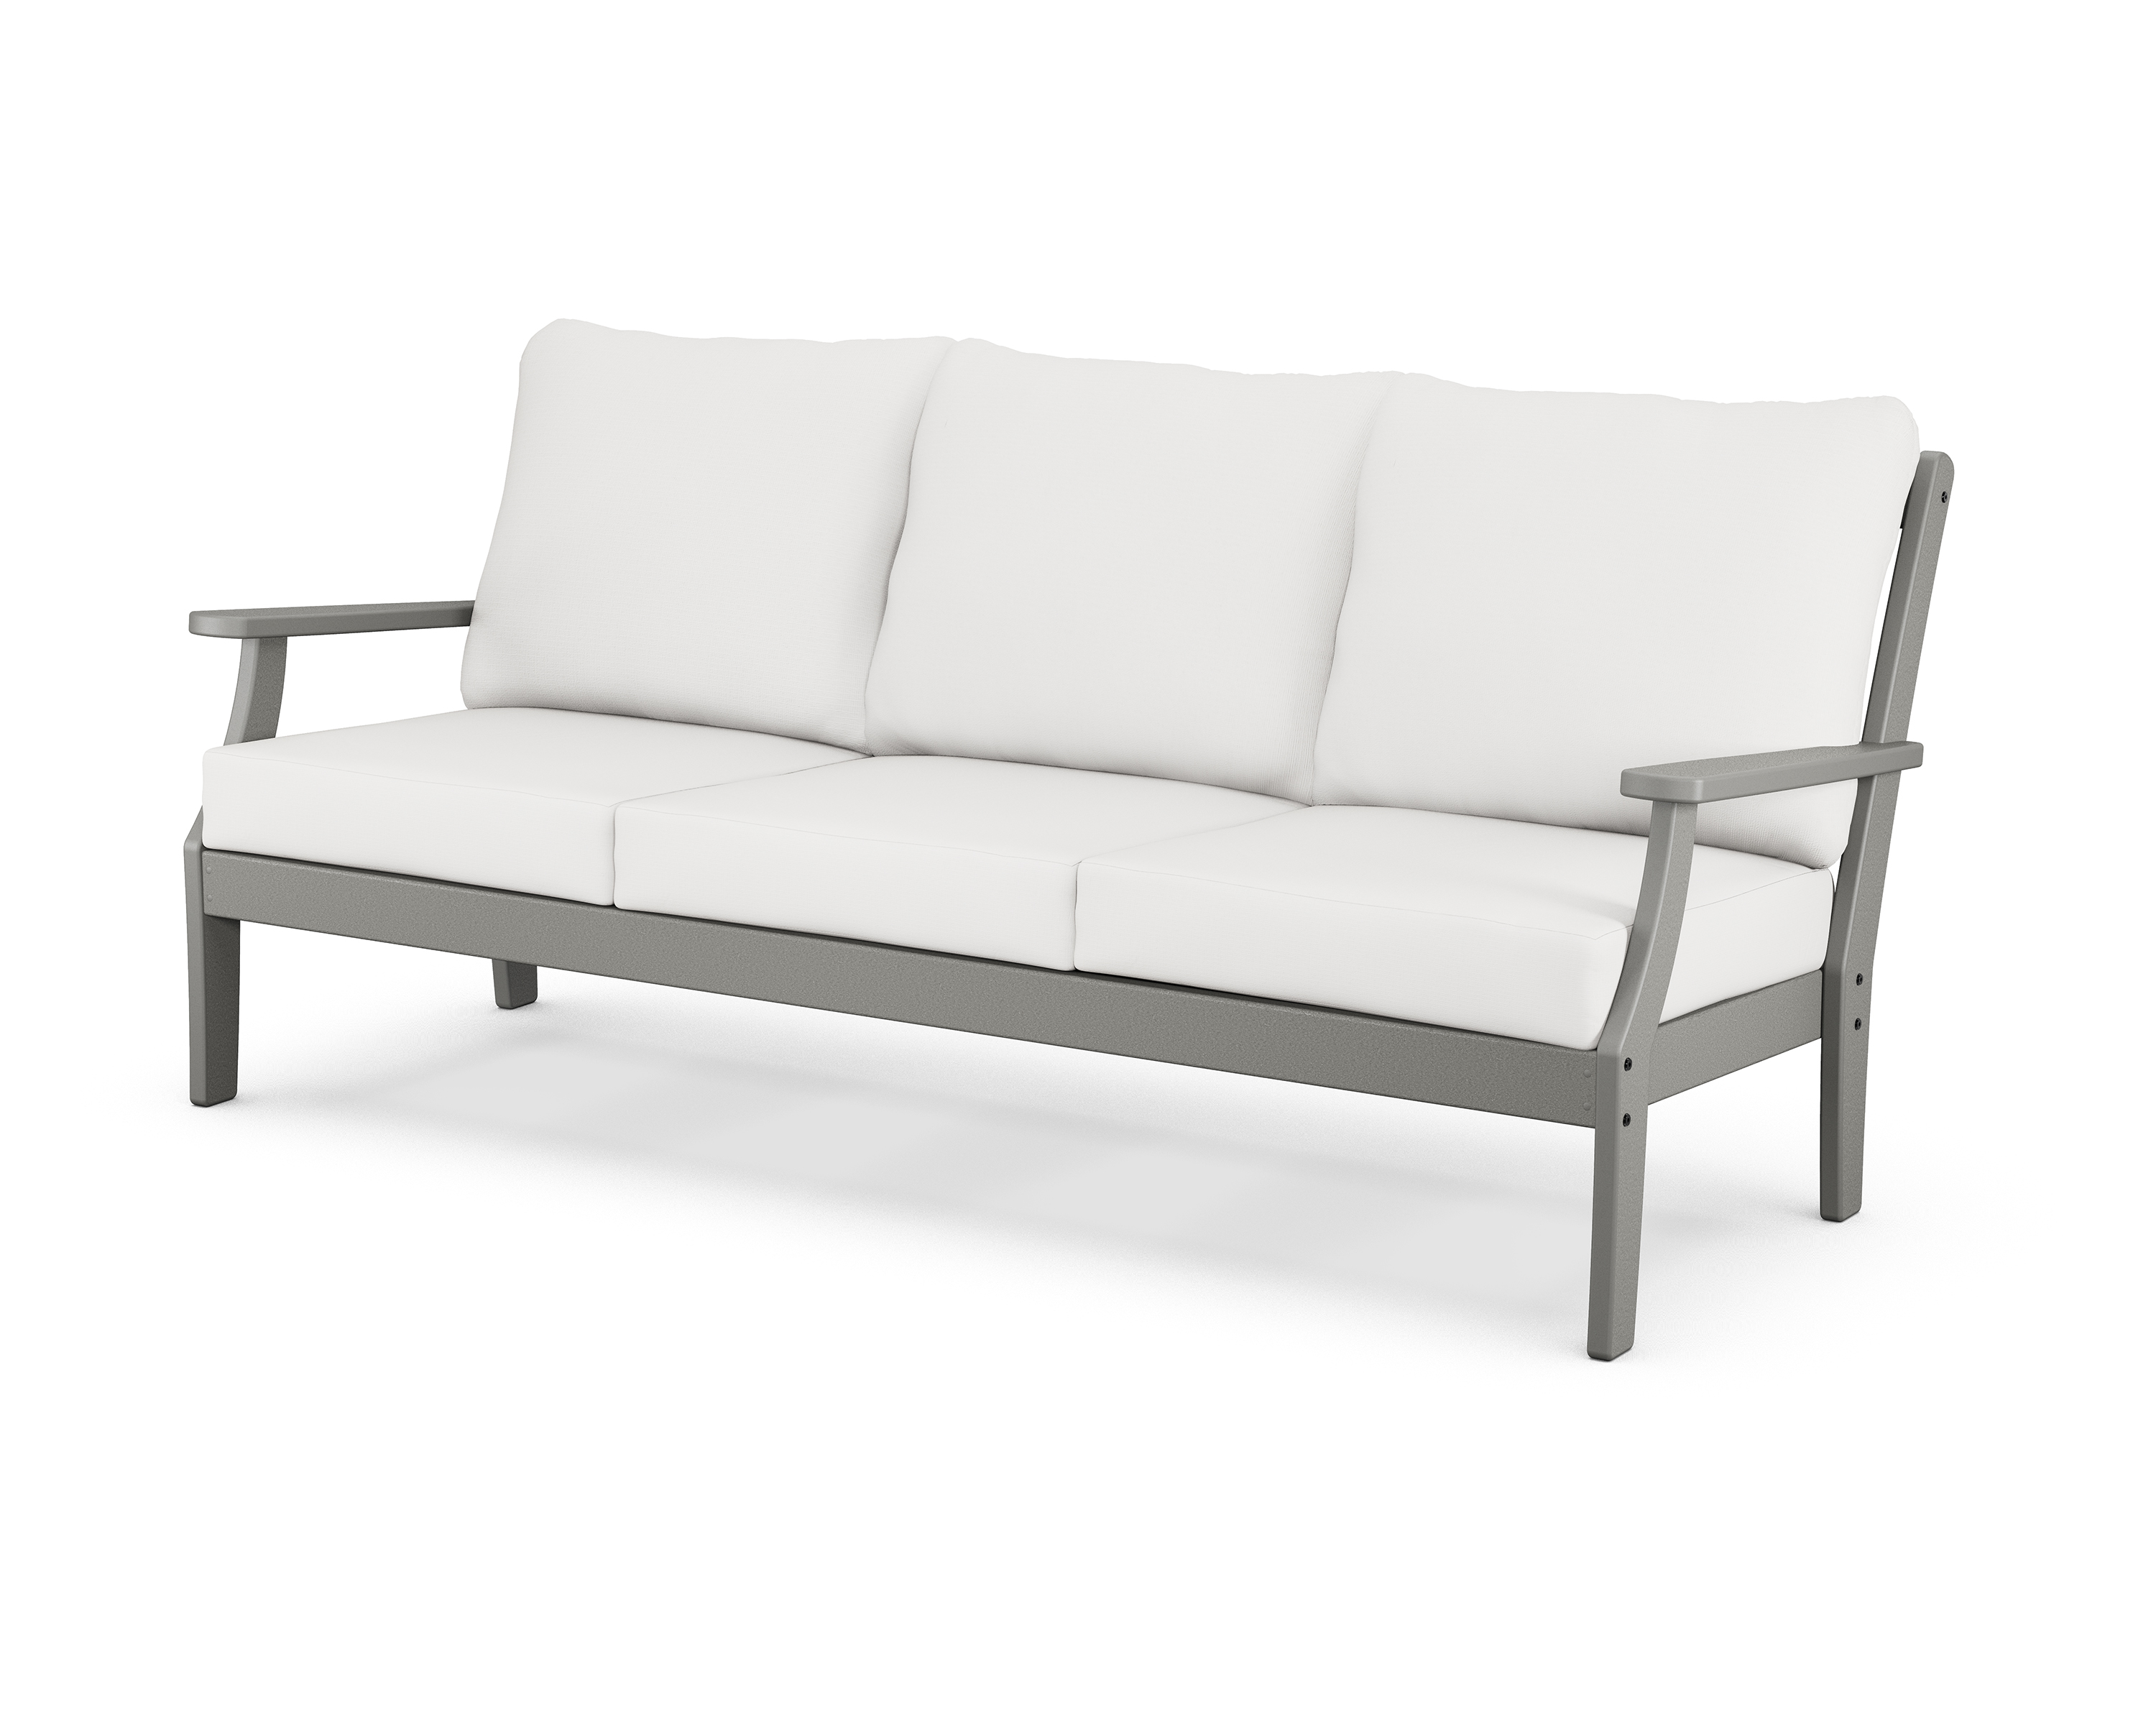 braxton deep seating sofa in slate grey / textured linen product image